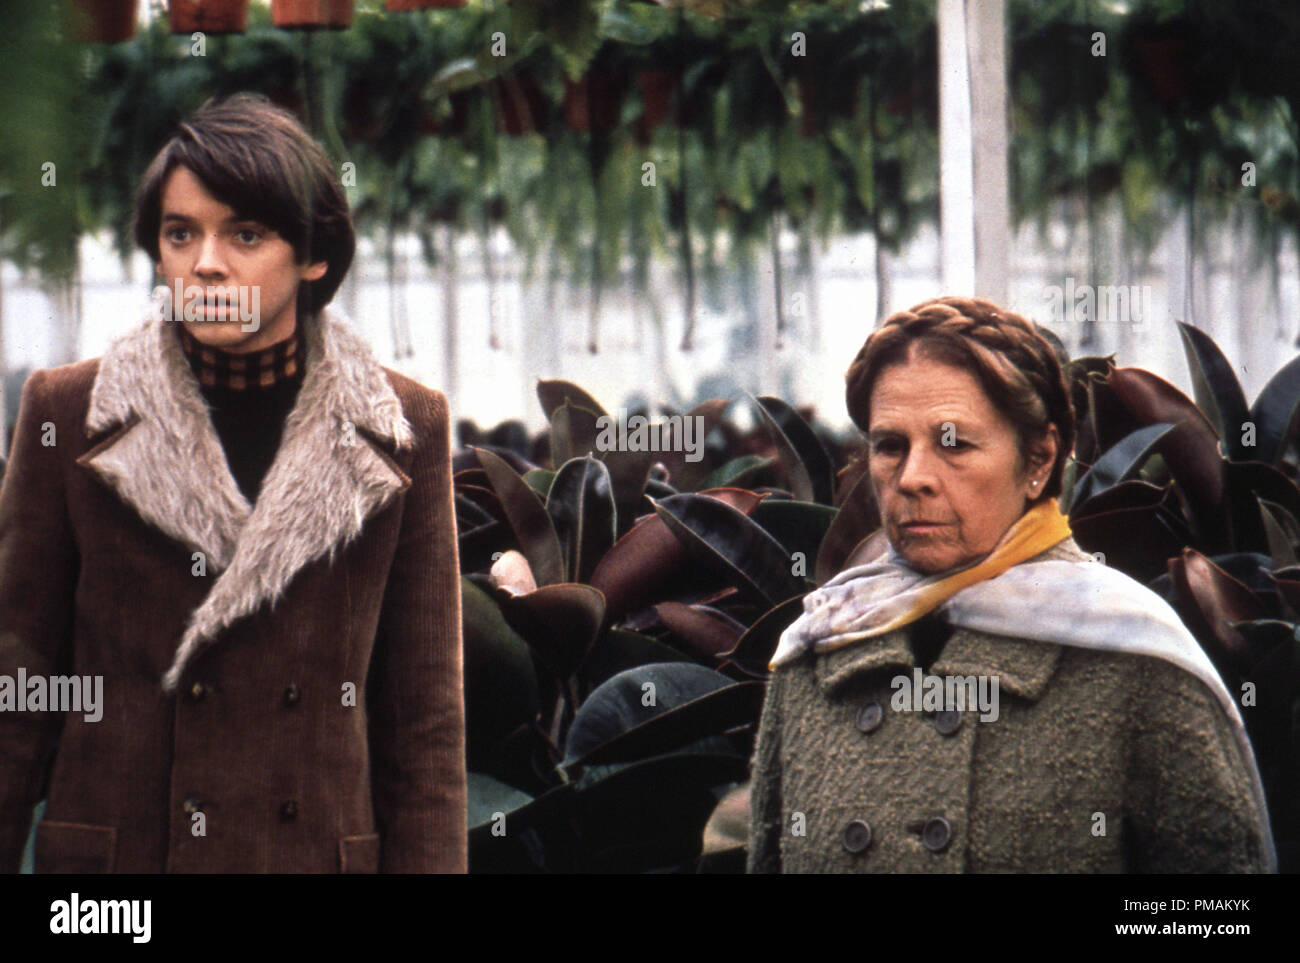 Bud Cort, Ruth Gordon, 'Harold and Maude' (1971) Paramount Pictures   File Reference # 33300 792THA Stock Photo